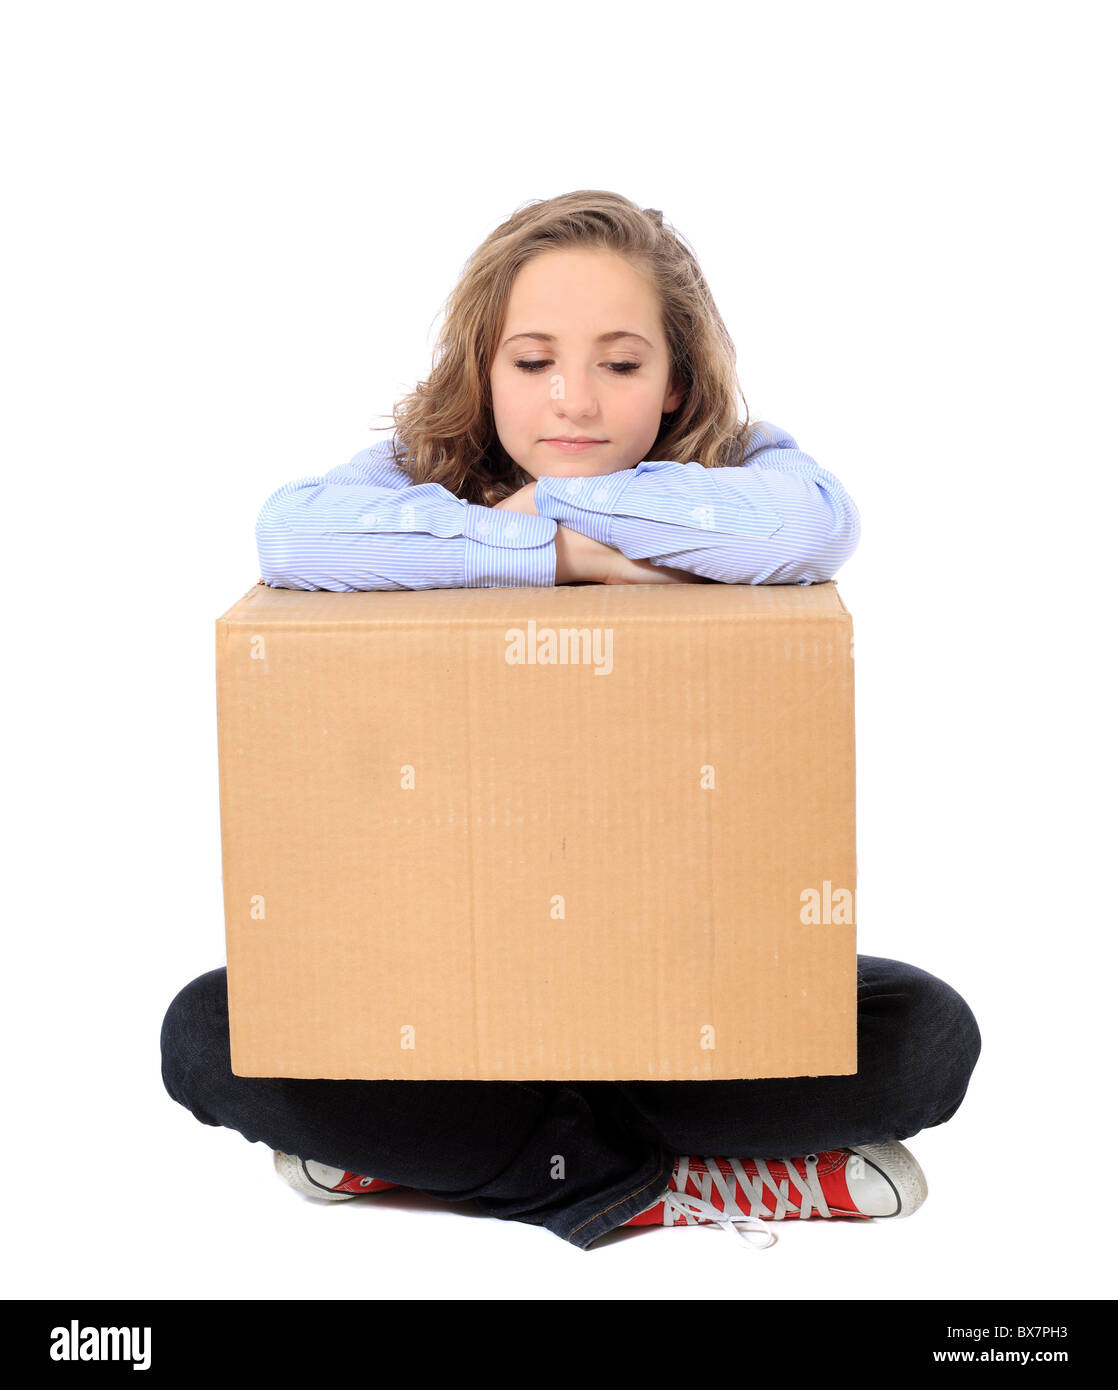 Exhausted young girl sitting on floor holding moving box. All on white background. Stock Photo